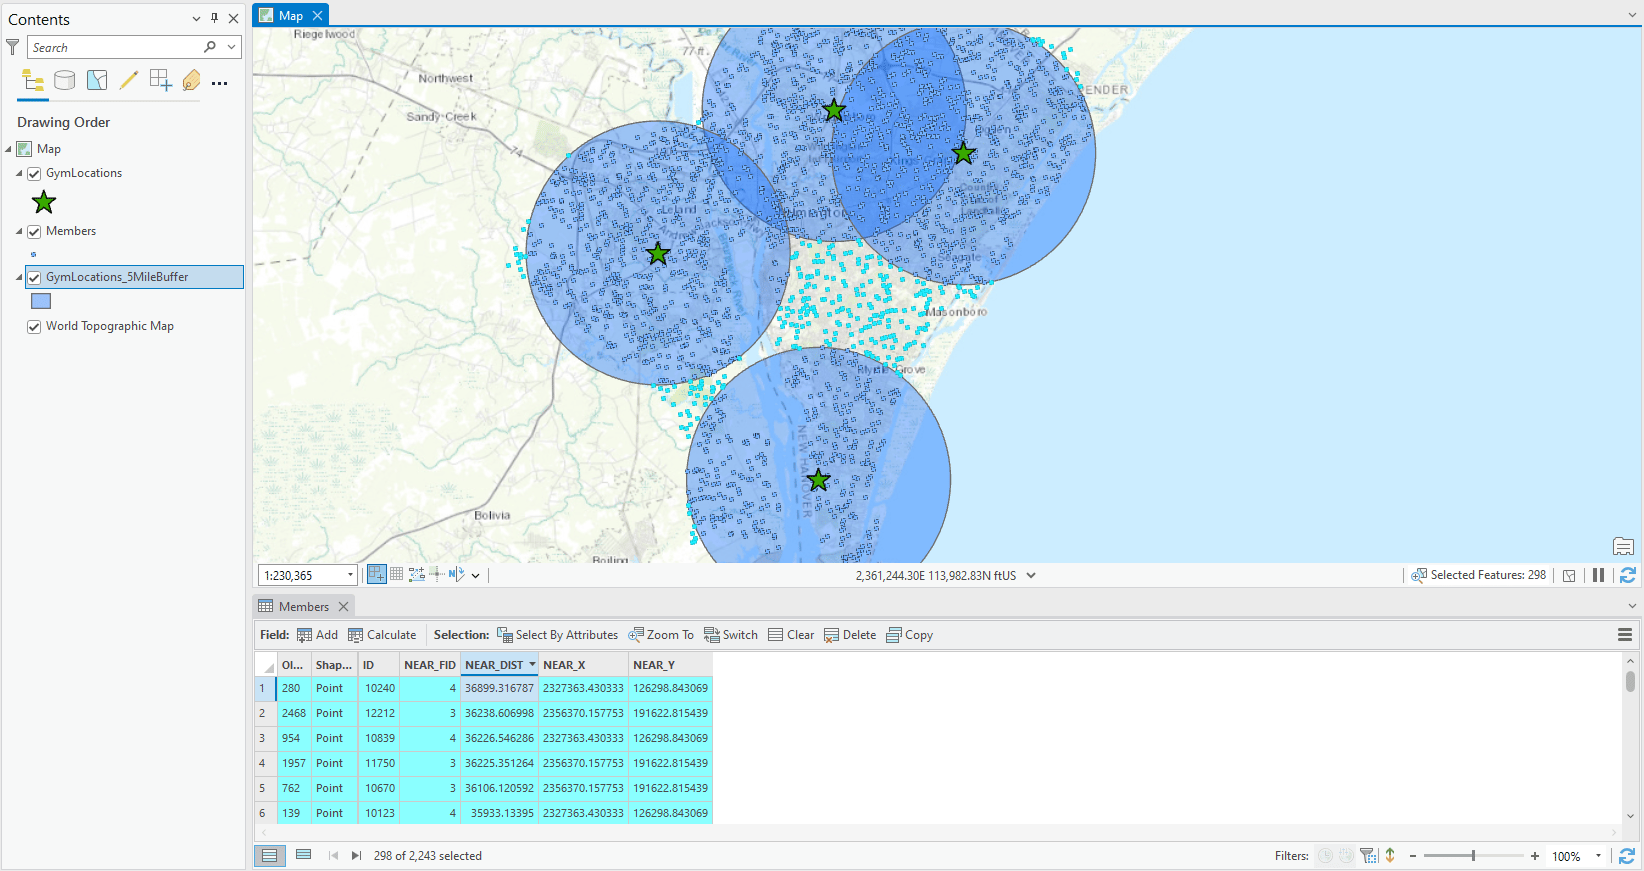 Figure 1: Example of site suitability analysis using ArcGIS Pro.